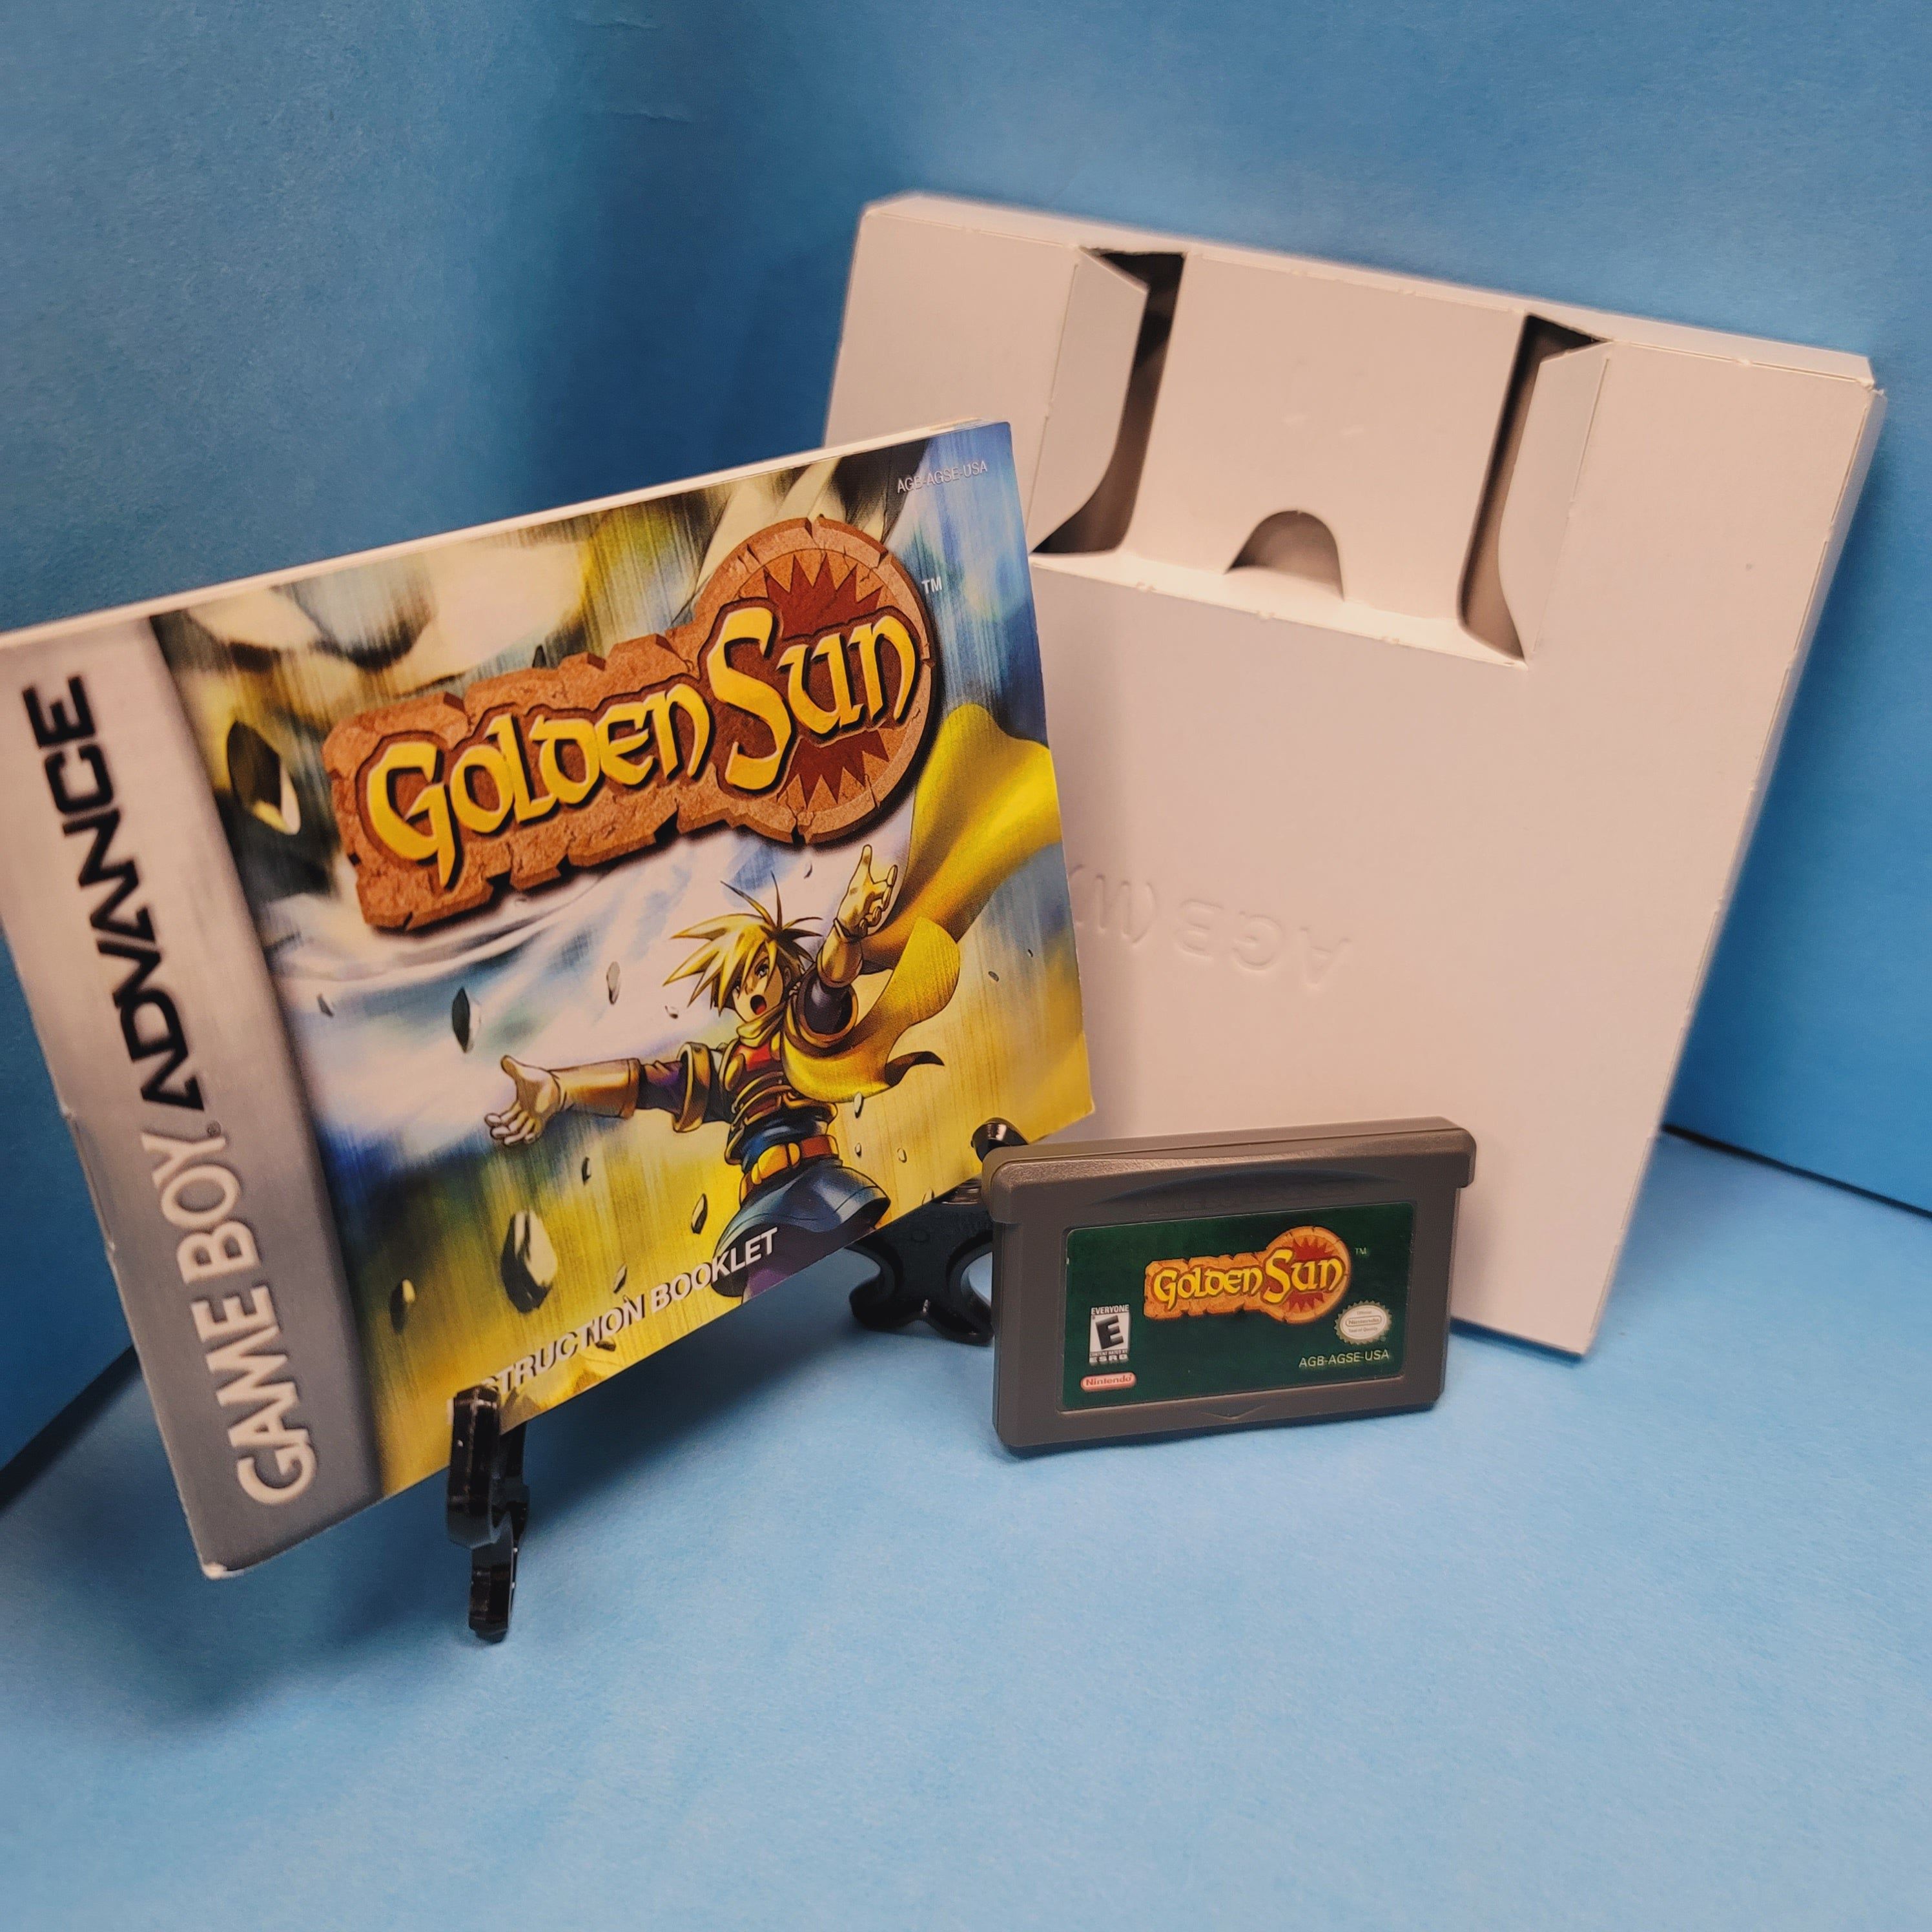 GBA - Golden Sun (Complete in Box / B+ / With Manual)